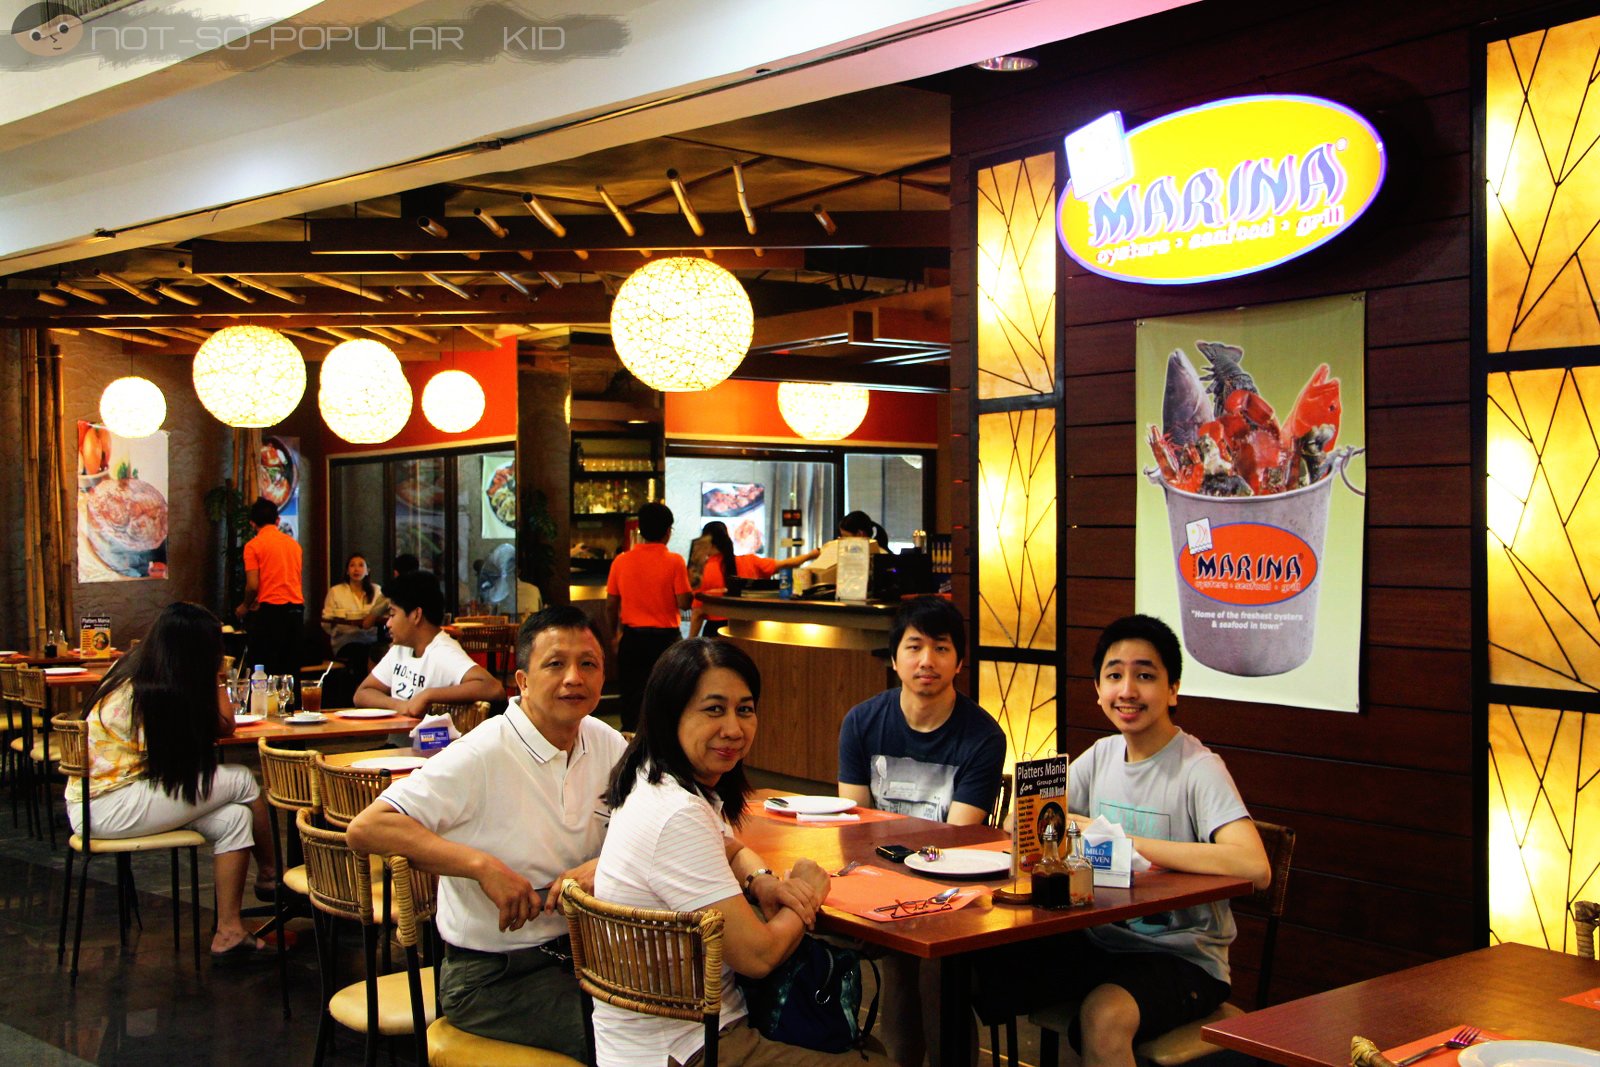 MARINA Seafood Restaurant in Robinson's Place Ermita - A Not-So-Popular